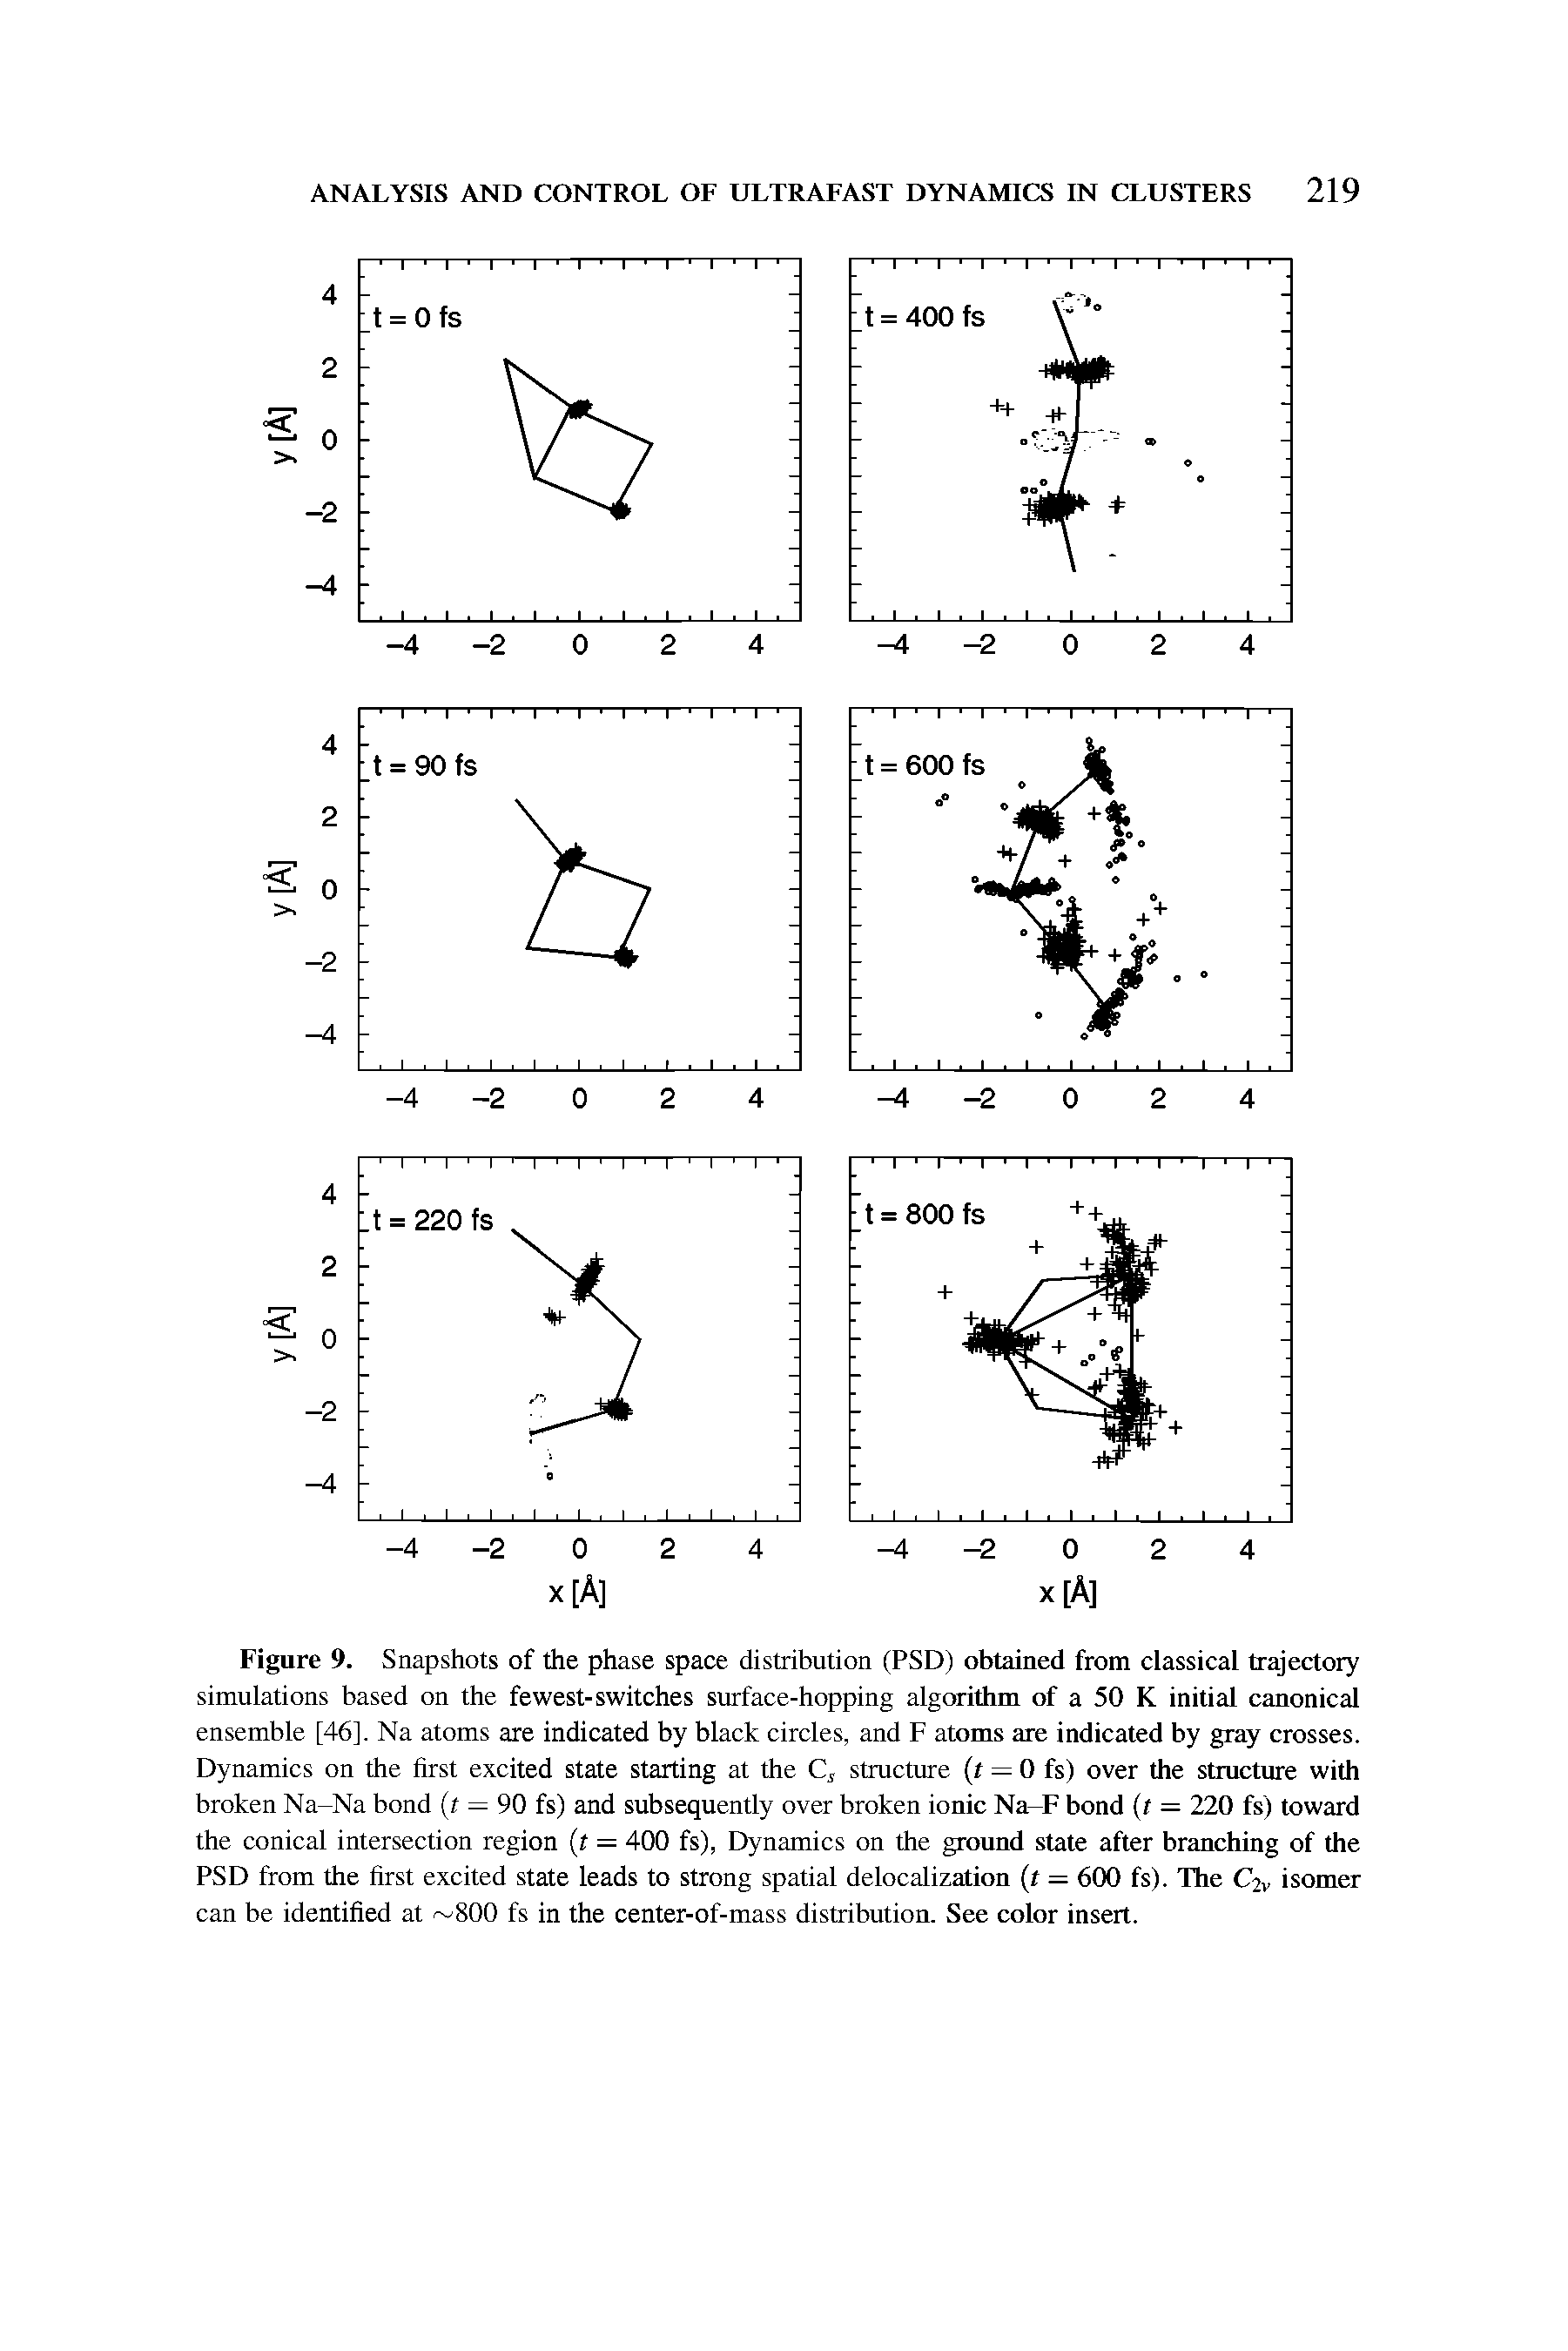 Figure 9. Snapshots of the phase space distribution (PSD) obtained from classical trajectory simulations based on the fewest-switches surface-hopping algorithm of a 50 K initial canonical ensemble [46], Na atoms are indicated by black circles, and F atoms are indicated by gray crosses. Dynamics on the hrst excited state starting at the Cj structure (t = 0 fs) over the structure with broken Na-Na bond t = 90 fs) and subsequently over broken ionic Na-F bond (t = 220 fs) toward the conical intersection region (t = 400 fs), Dynamics on the ground state after branching of the PSD from the hrst excited state leads to strong spatial delocalization (t = 600 fs). The C2v isomer can be identihed at 800 fs in the center-of-mass distribution. See color insert.